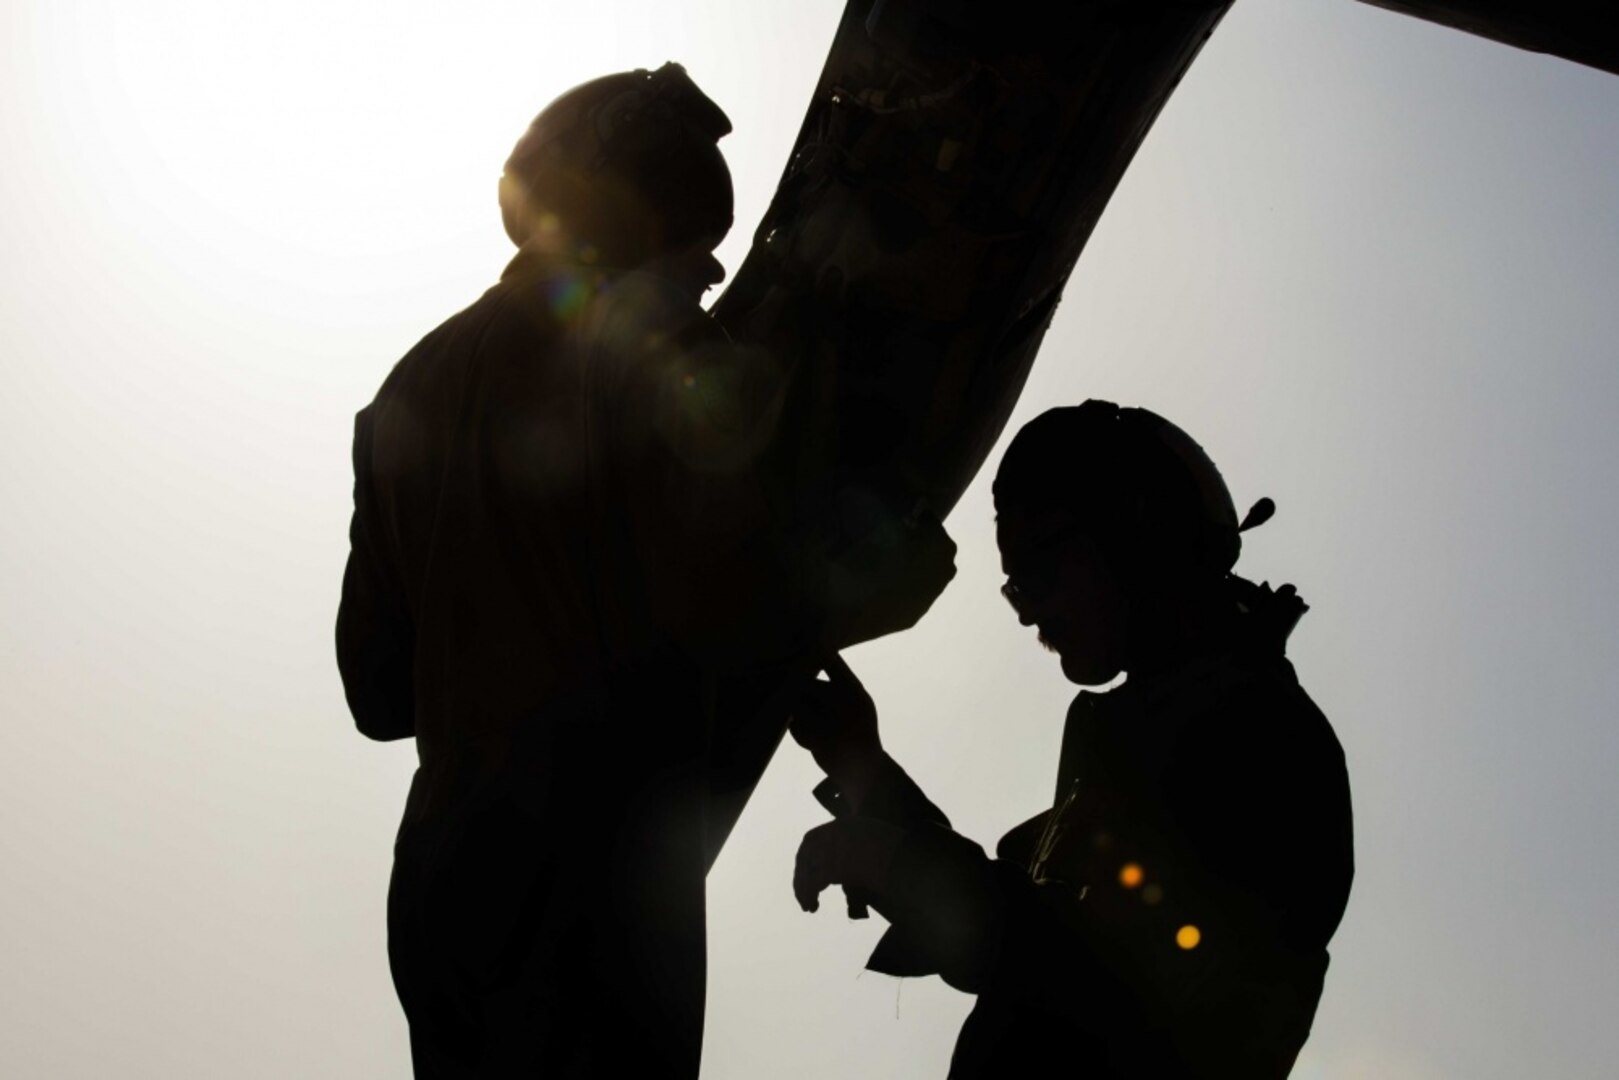 U.S. Marines perform routine maintenance on the rotor blade of an MV-22B Osprey during routine maintenance in support of Combined Joint Task Force – Operation Inherent Resolve on Al Asad Air Base, Iraq, June 8, 2018. CTJF-OIR is the military arm of the Global Coalition to defeat ISIS in designated parts of Iraq and Syria.